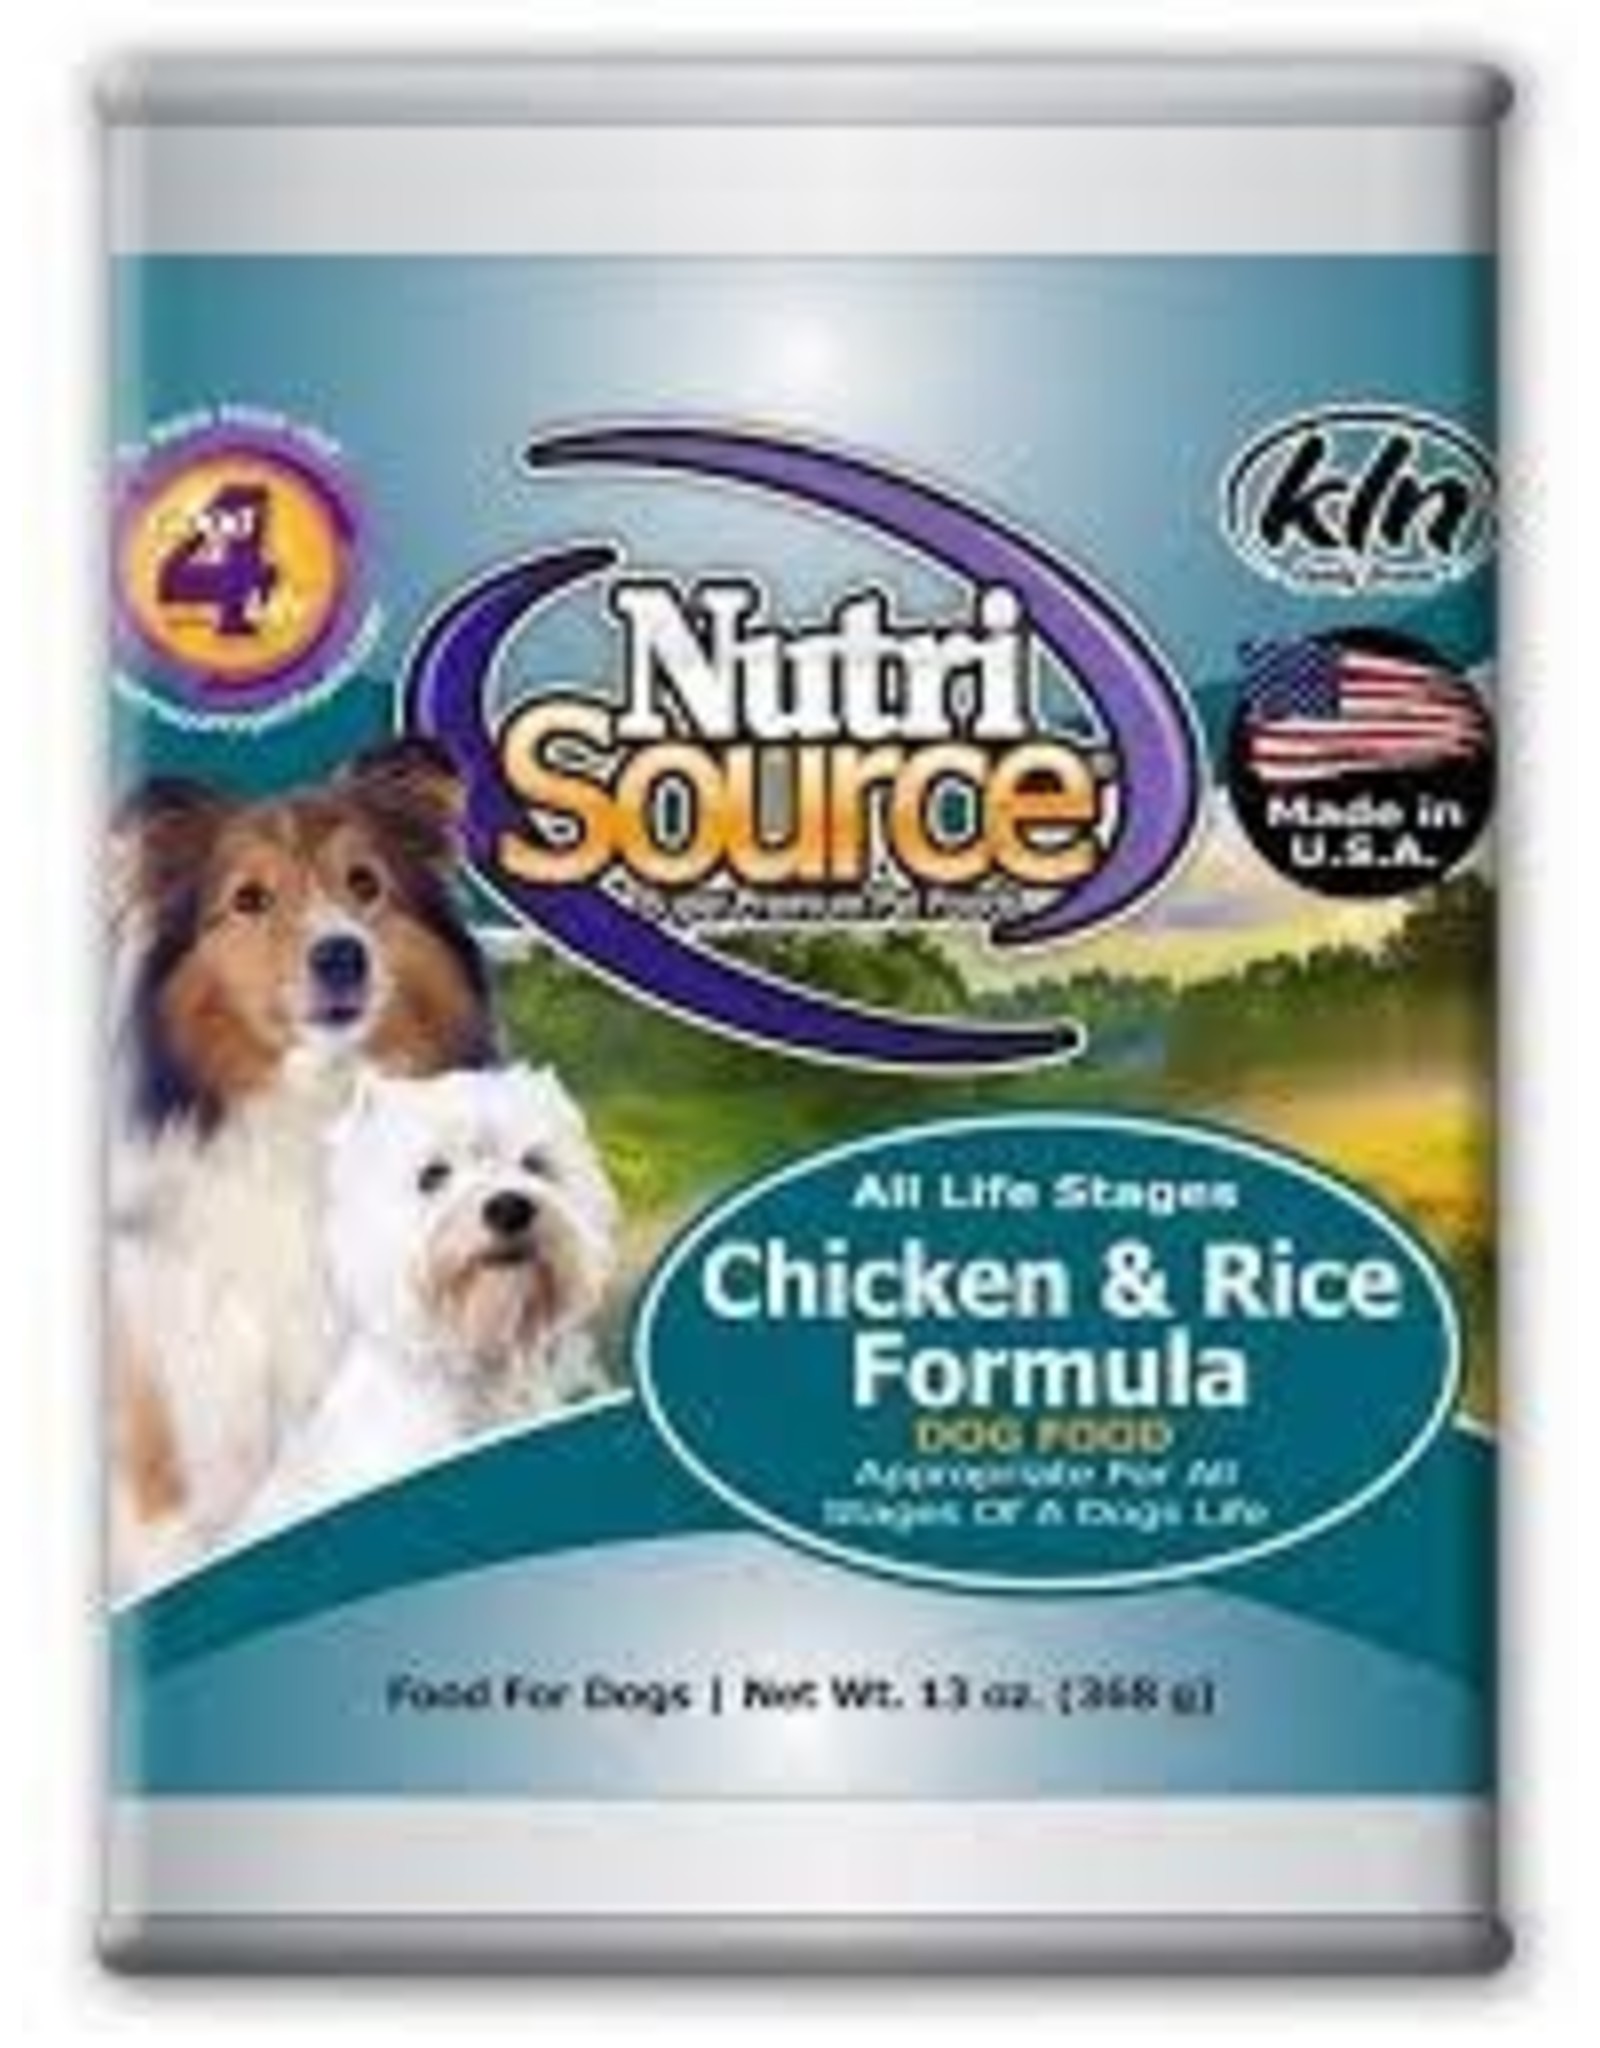 Nutri Source NUTRI SOURCE - Chicken & Rice Canned Dog Food Pate -Single 13 oz- 92000-7 (Case price $33.47)